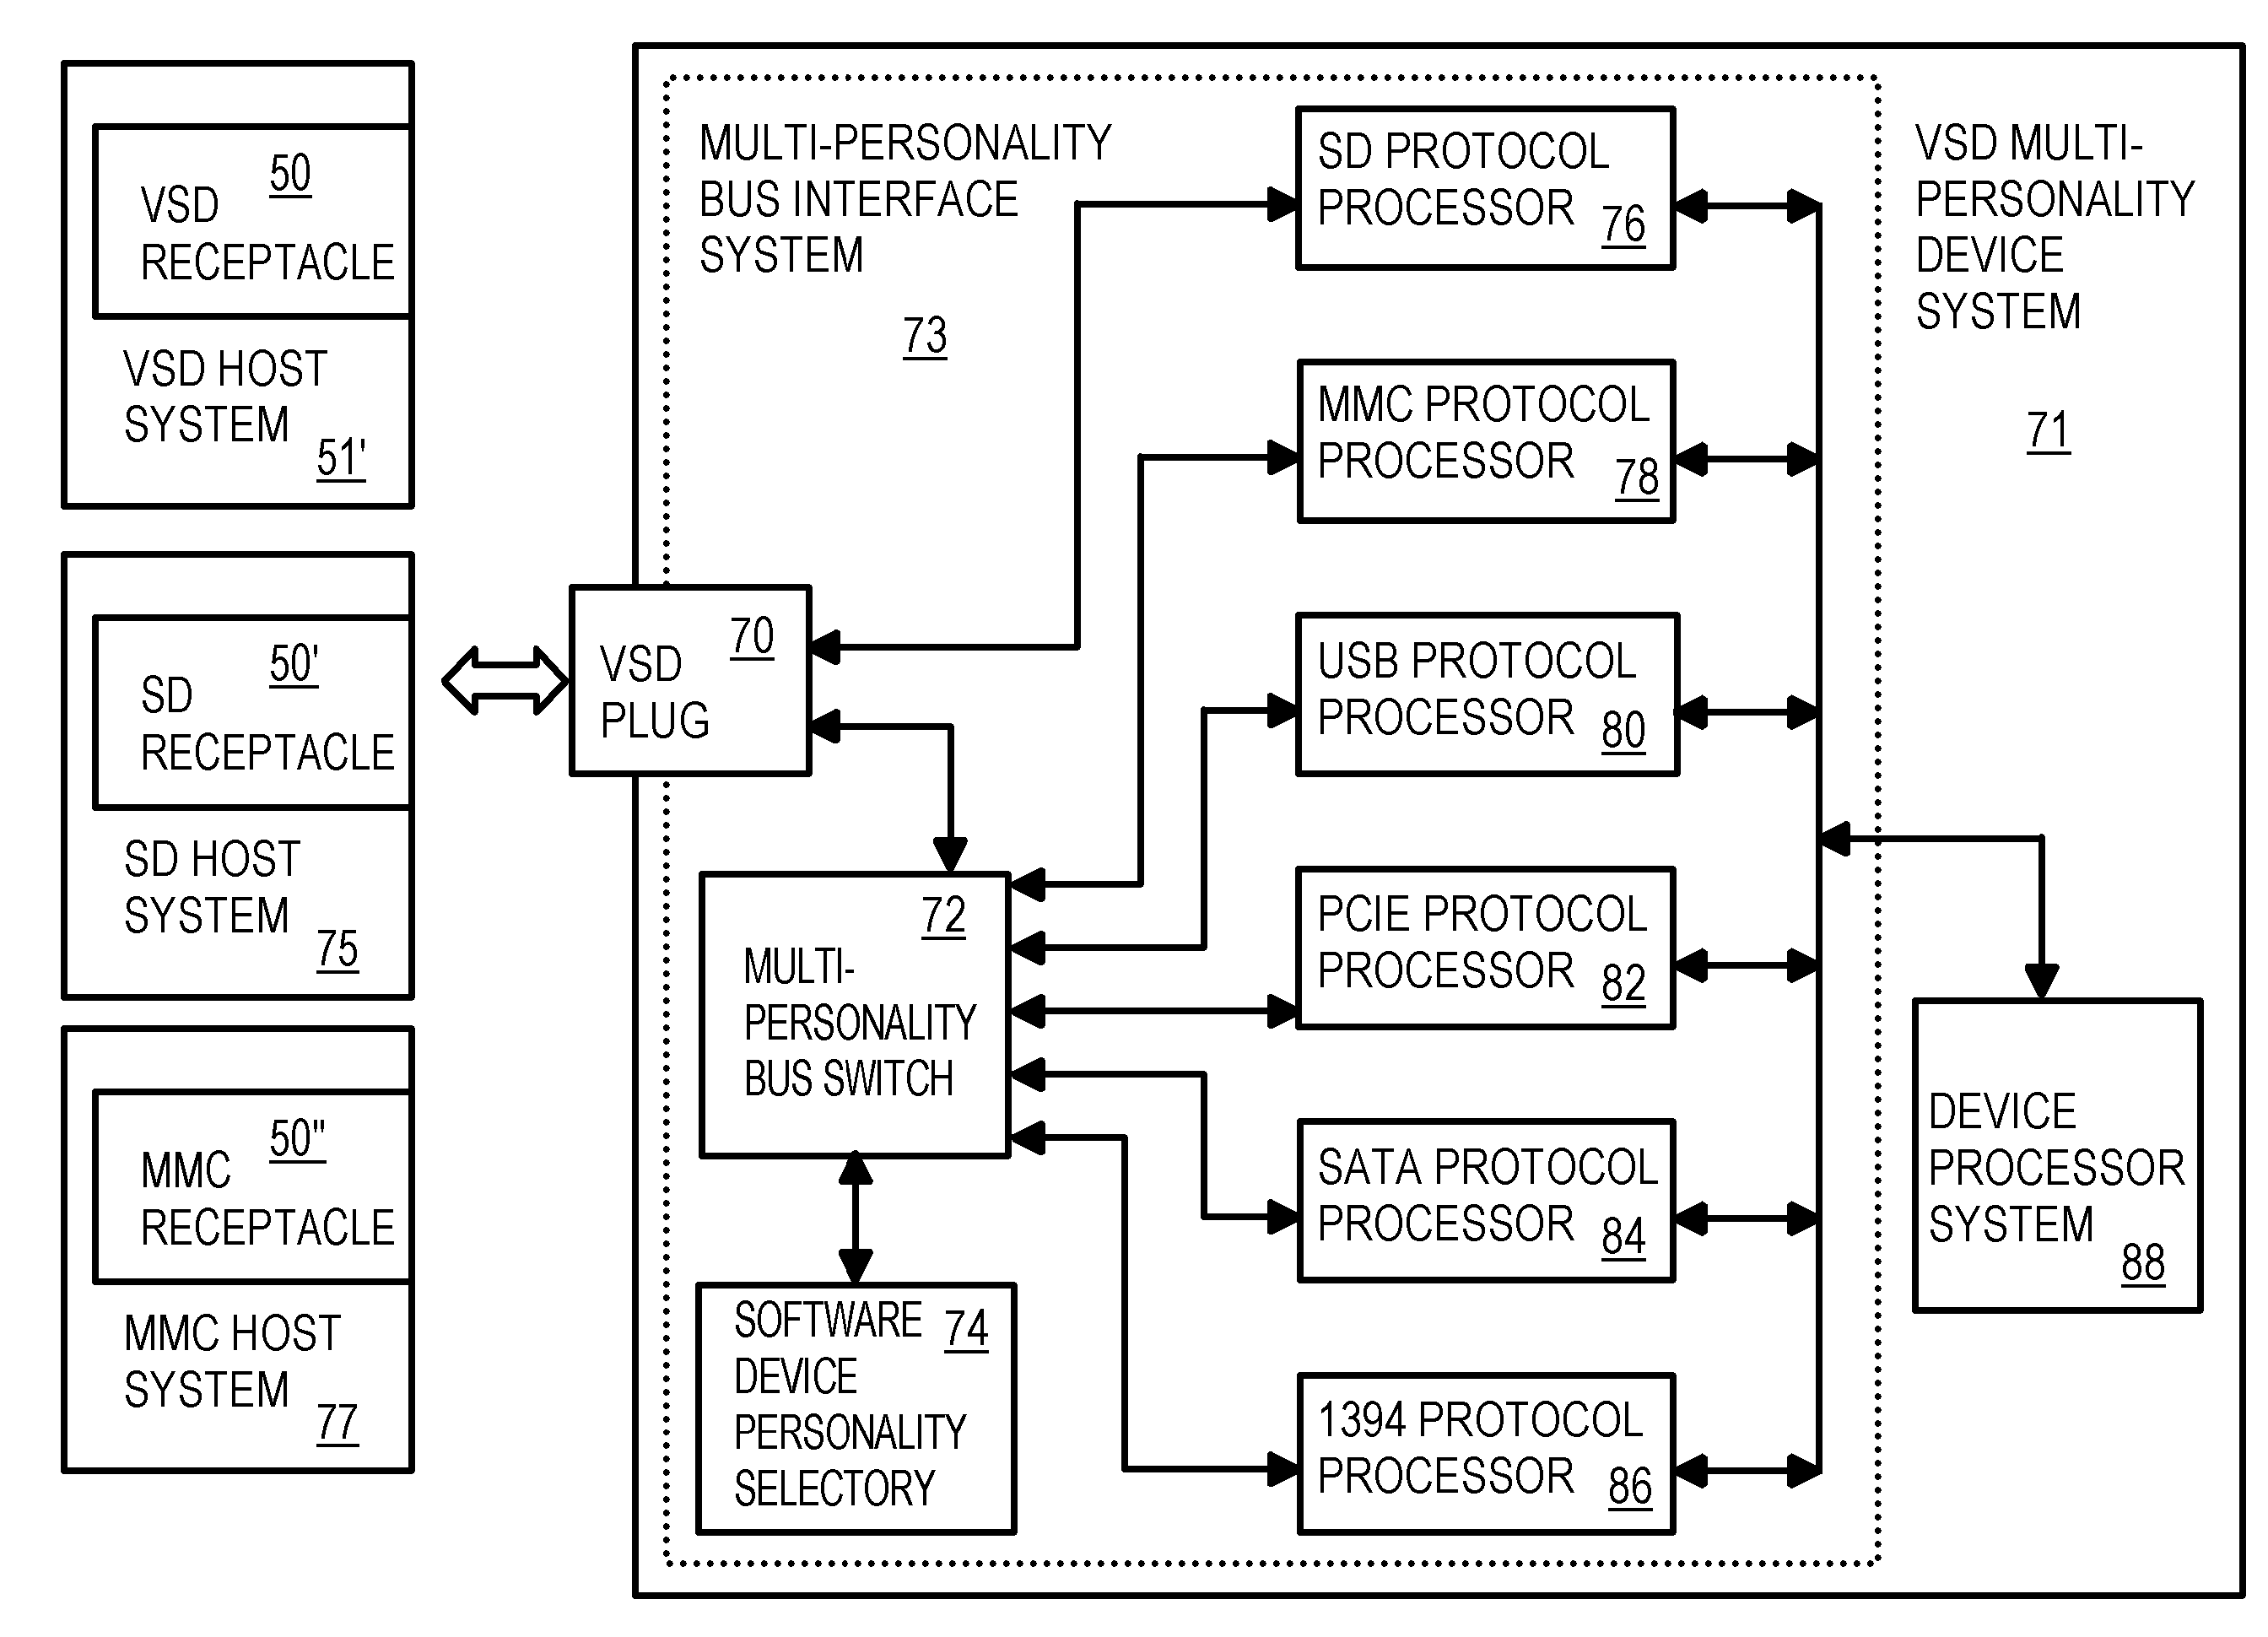 Extended-Secure-Digital interface using a second protocol for faster transfers